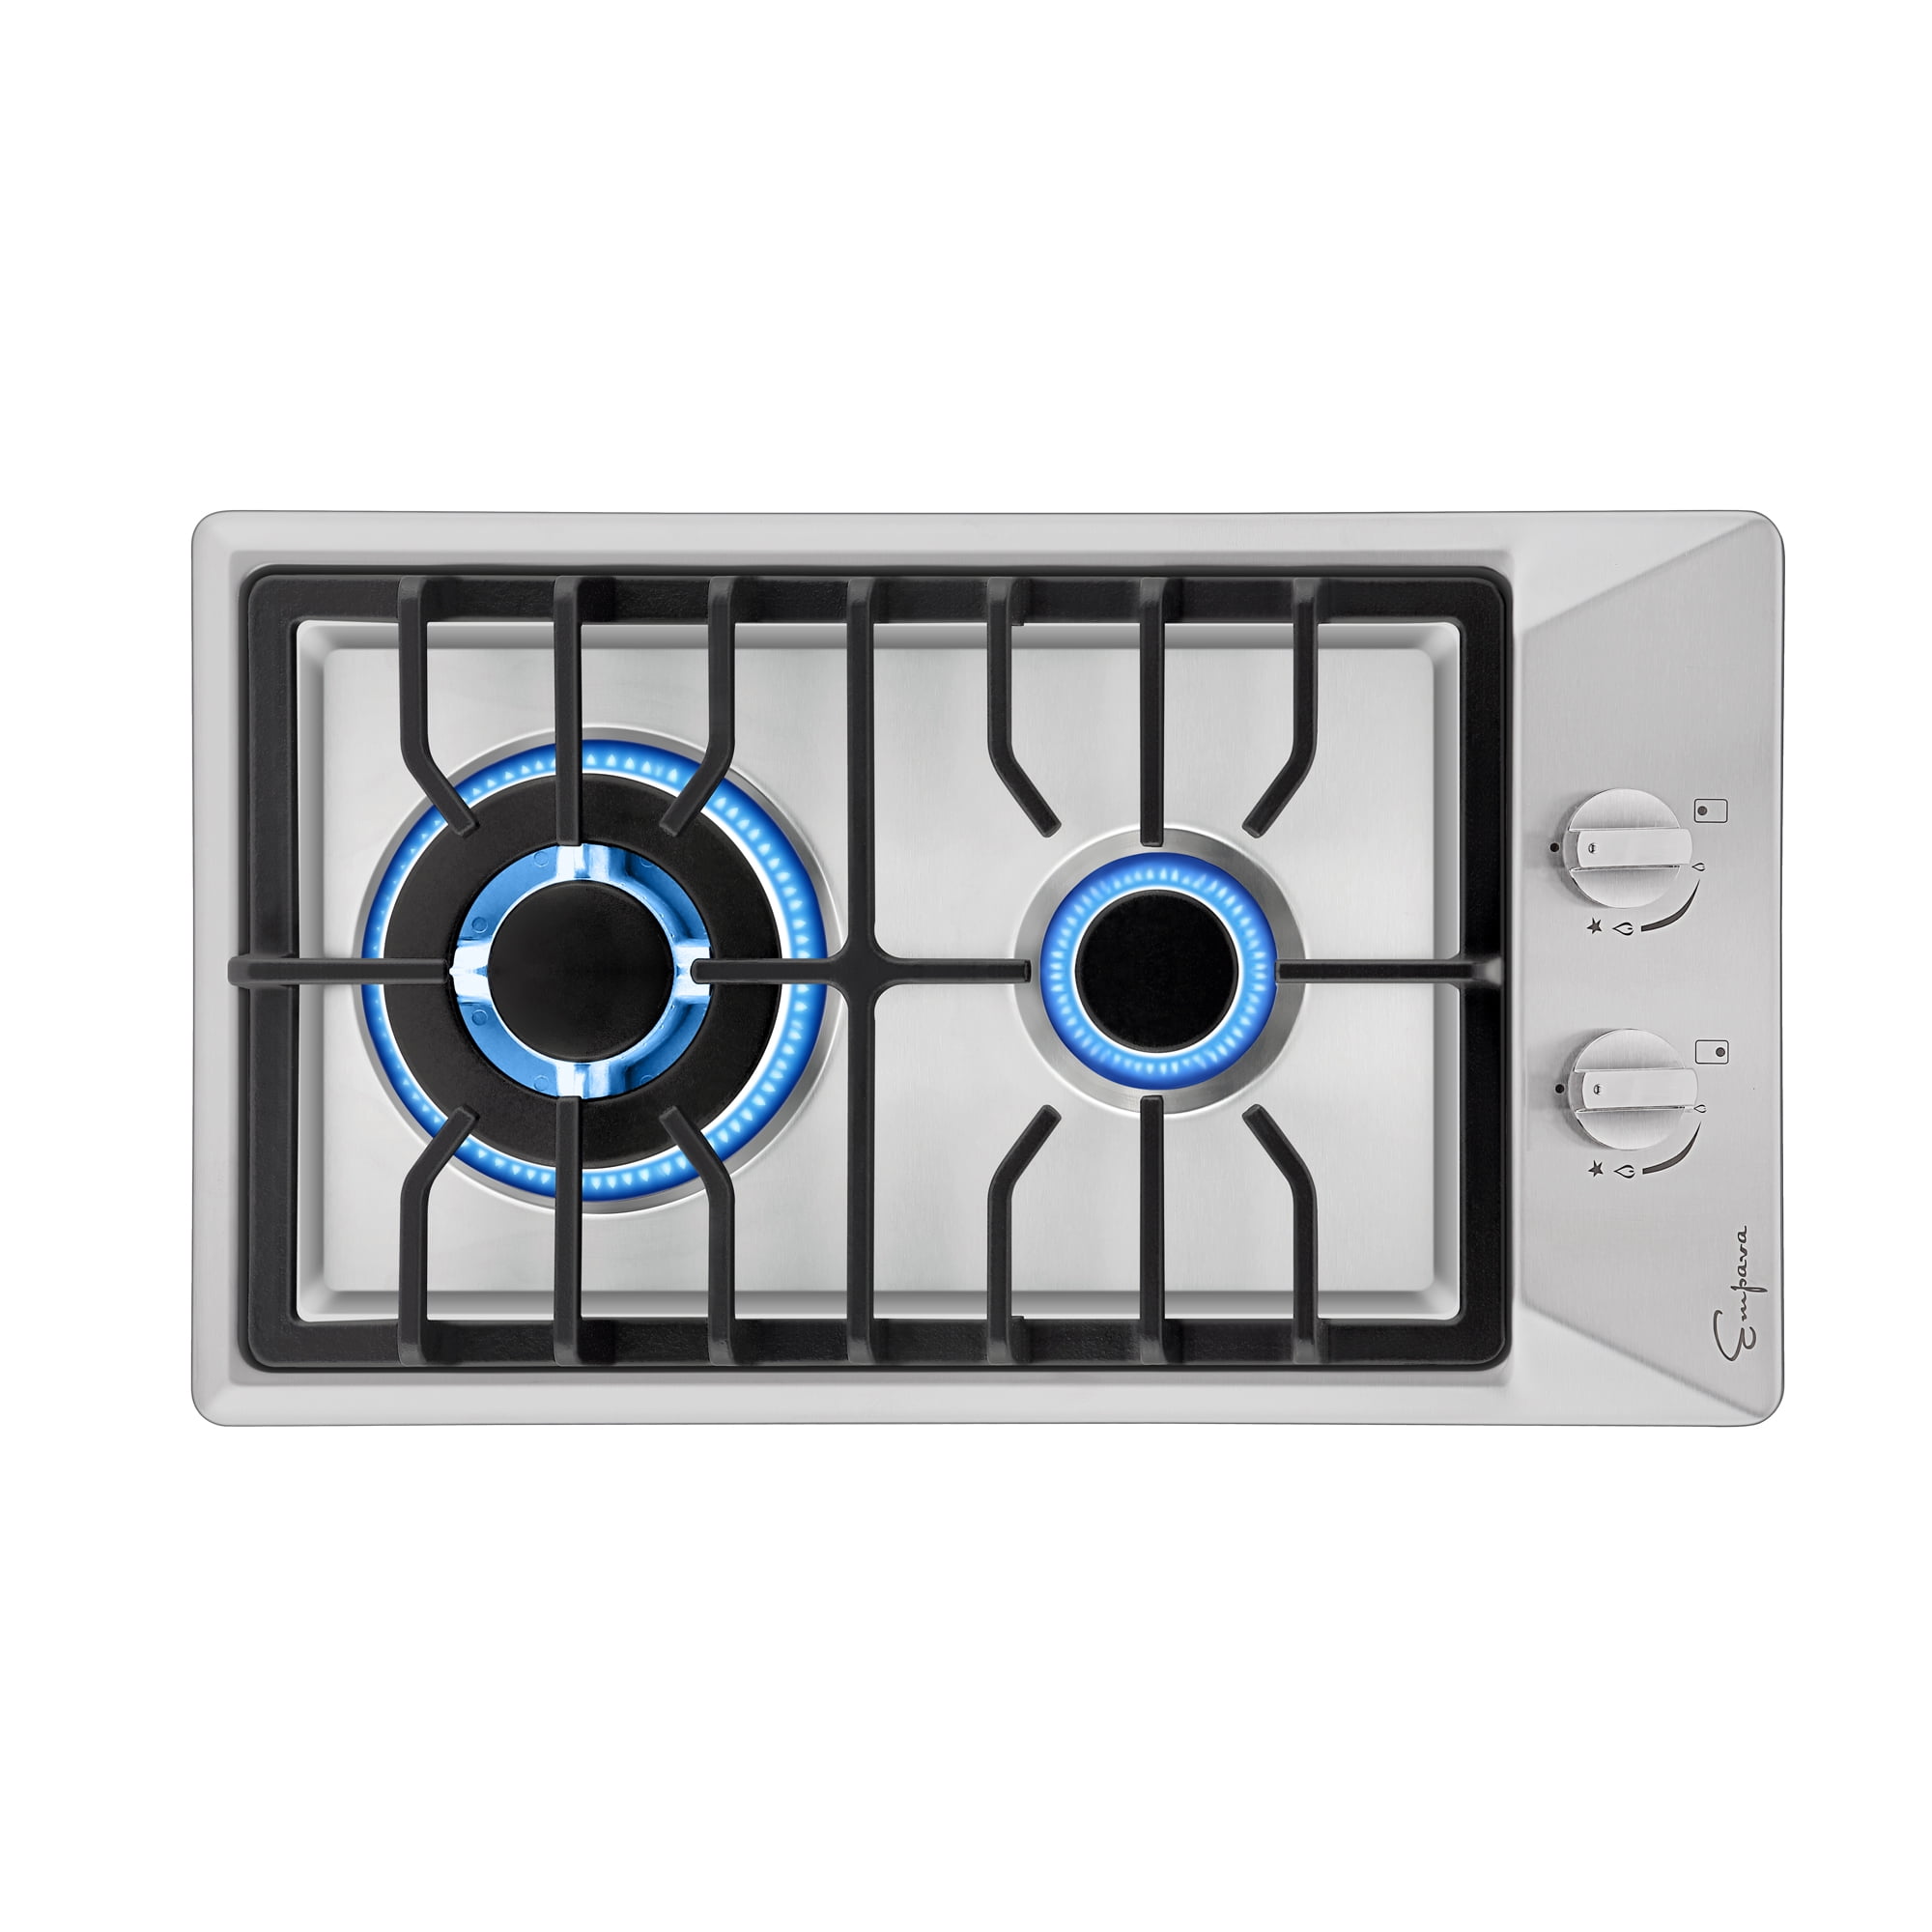 12 Inch Portable Stainless Steel Built-in Gas Stove Hob Gas Cooktop 2 Burners LPG/NG Dual Fuel Gas Cooktop with Automatic Flame-out Protection Easy to Clean Cooktops US 2-5 Days Delivery 